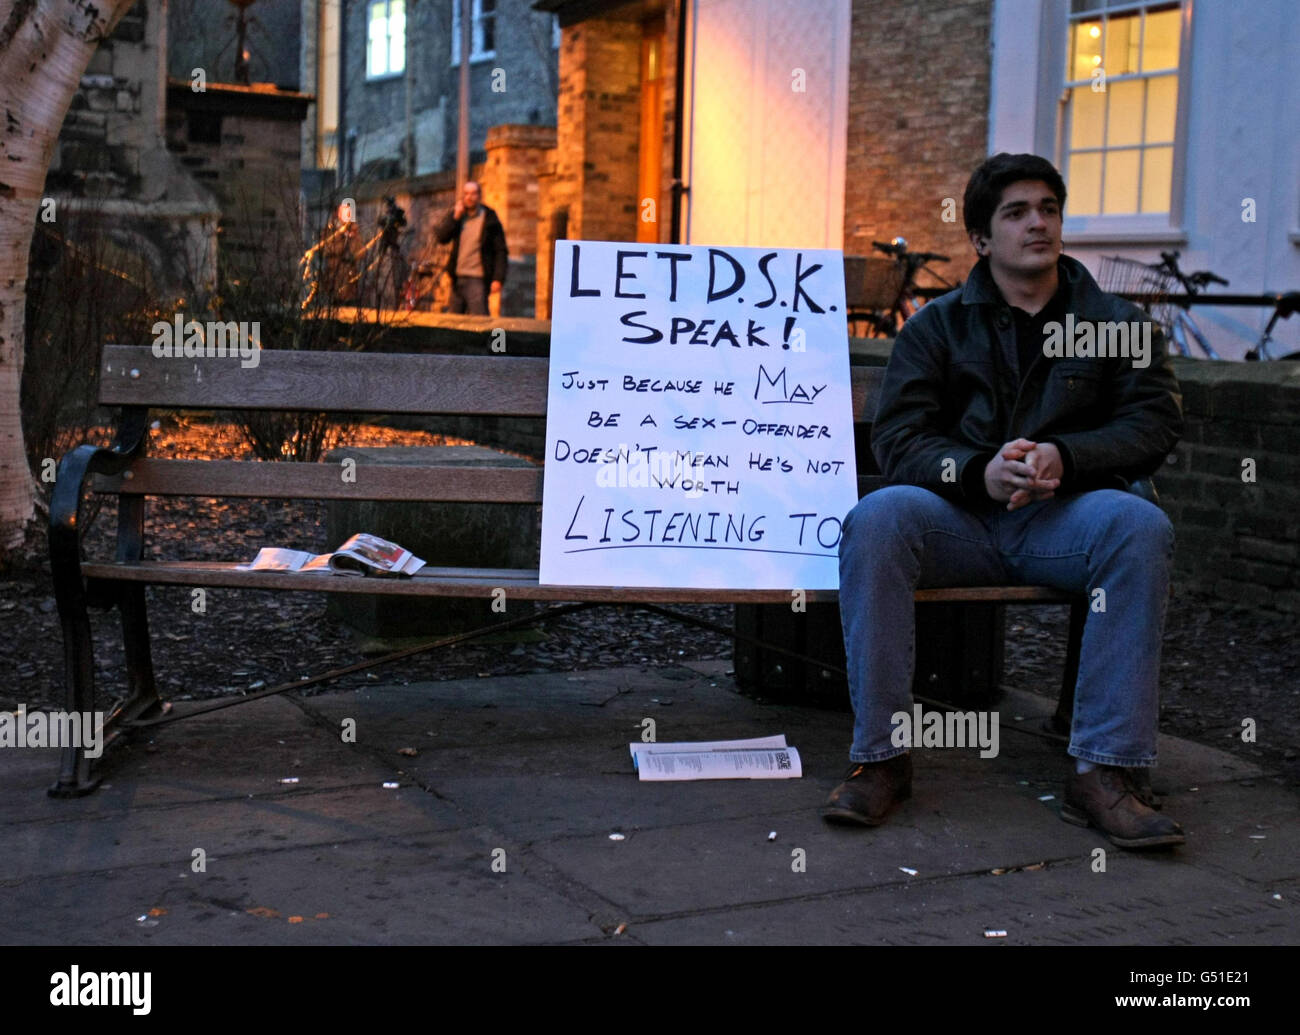 A protesters with a sign in support of The Cambridge Union's guest speaker, former head of the International Monetary Fund Dominique Strauss-Khan. Stock Photo